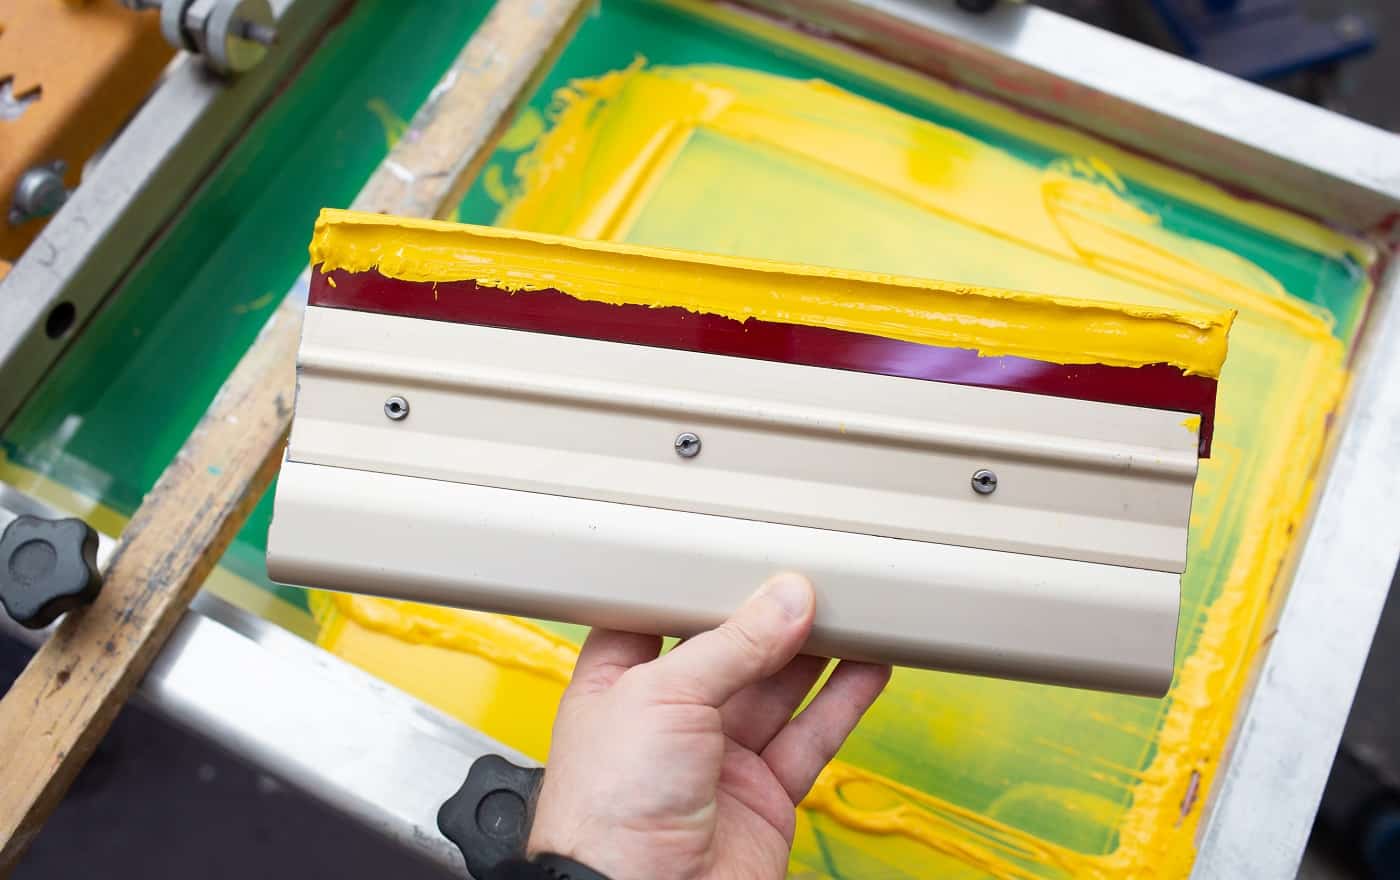 Squeegee for Serigraphy silk screen print process at clothes factory. Frame, squeegee and plastisol color paints.